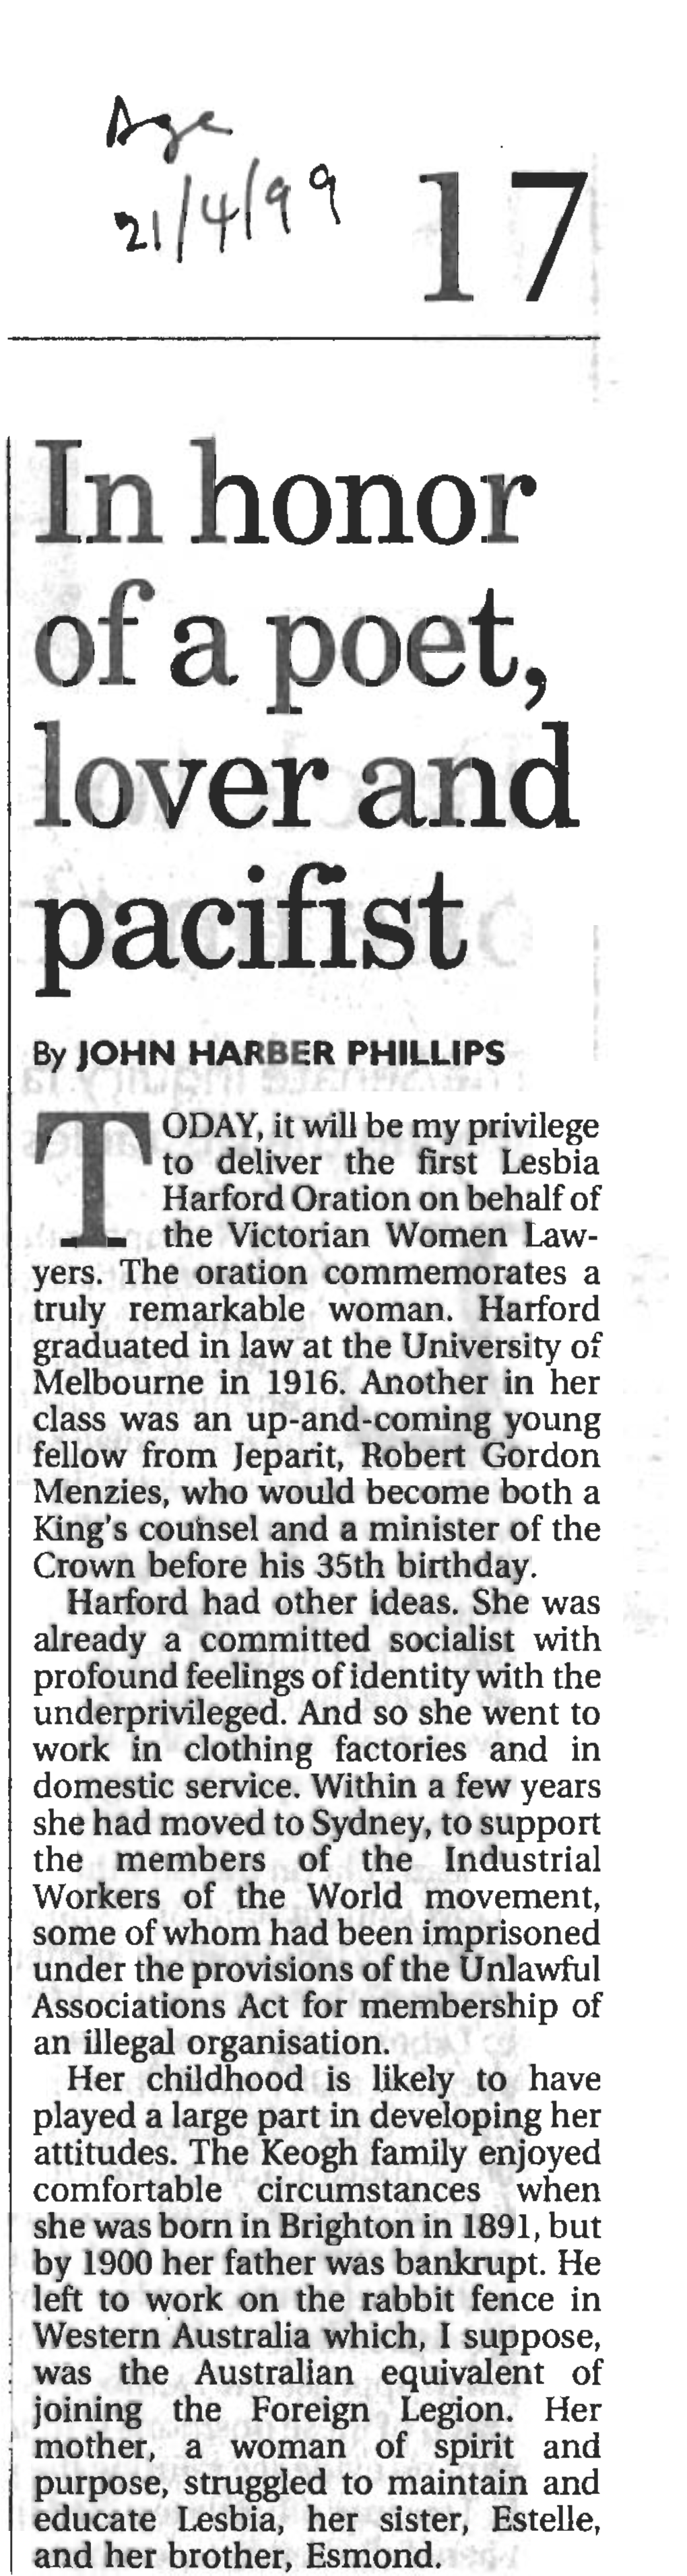 By JOHN HARBER PHILLIPS ODAY, It Will Be My Privilege to Deliver the First Lesbia Harford Oration on Behalf of Tthe Victorian Women Law- Yers